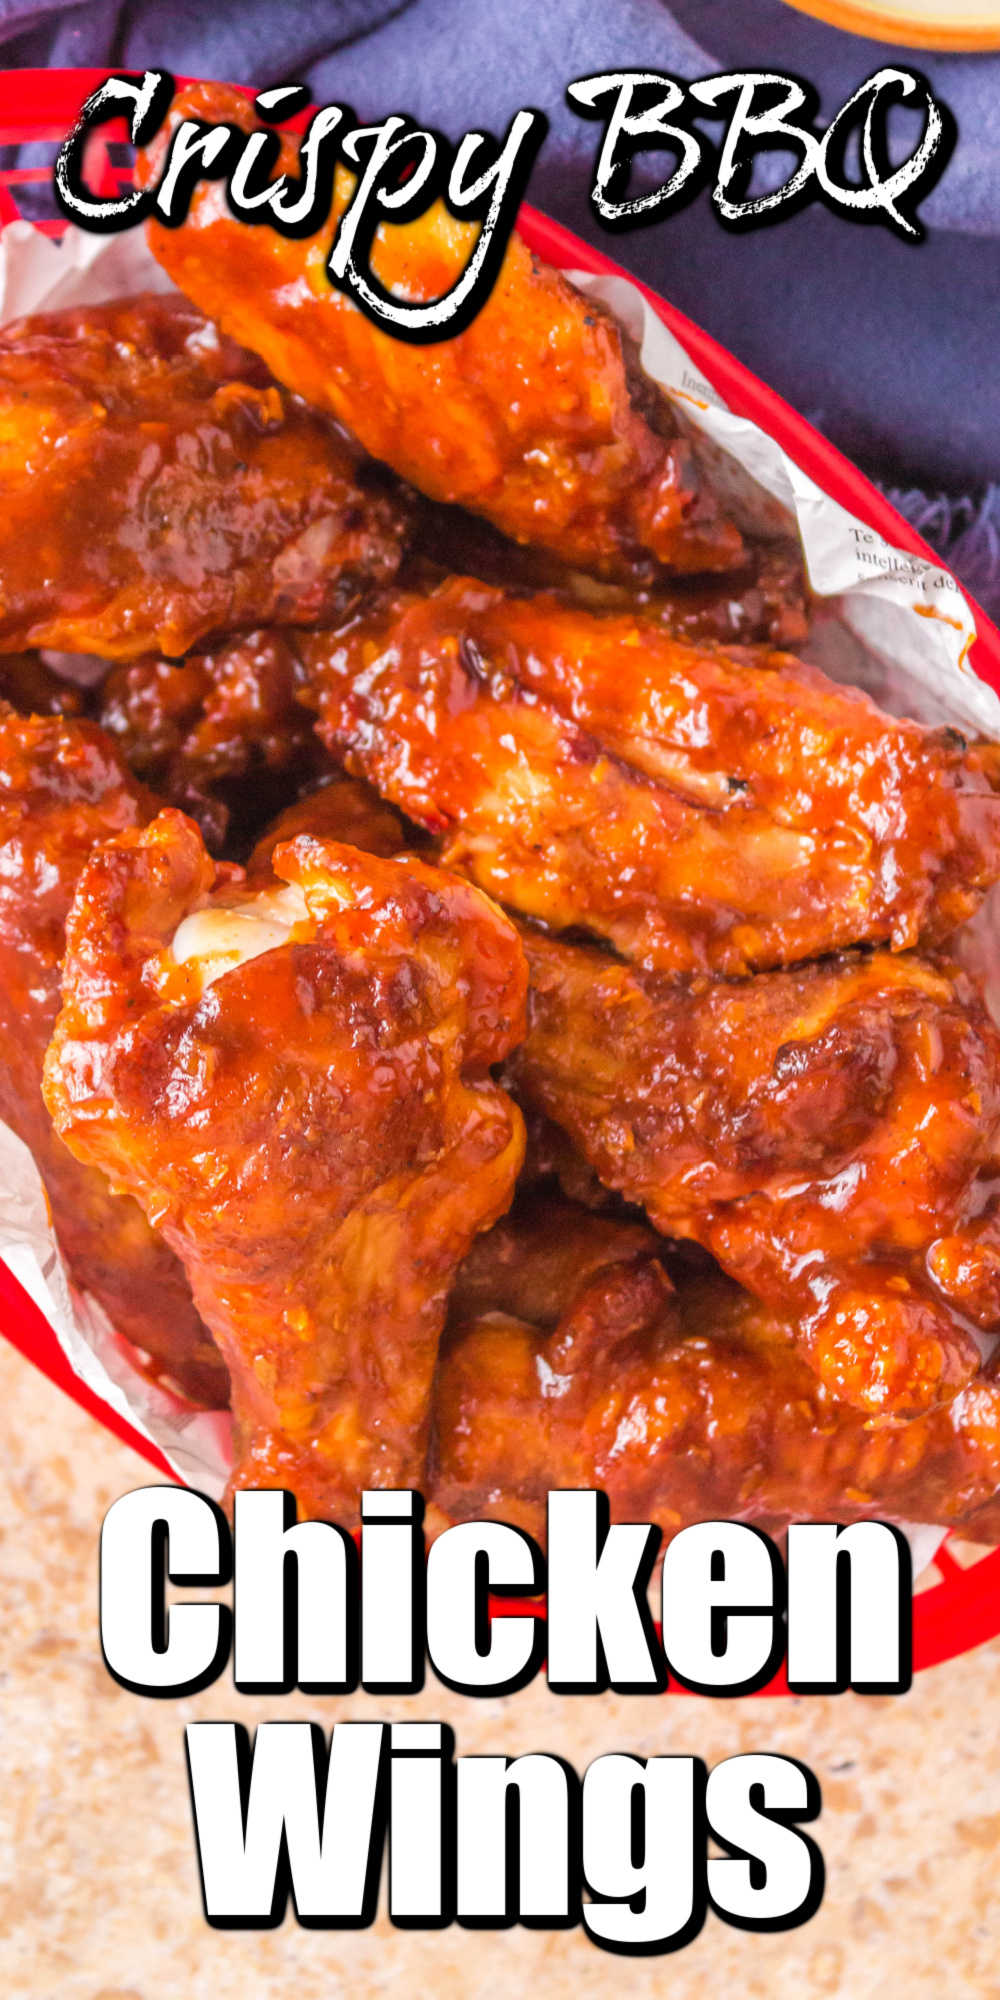 These Crispy BBQ Chicken Wings are so quick and easy; oh, did I mention tender and juicy! And can have them on the table in less than an hour!